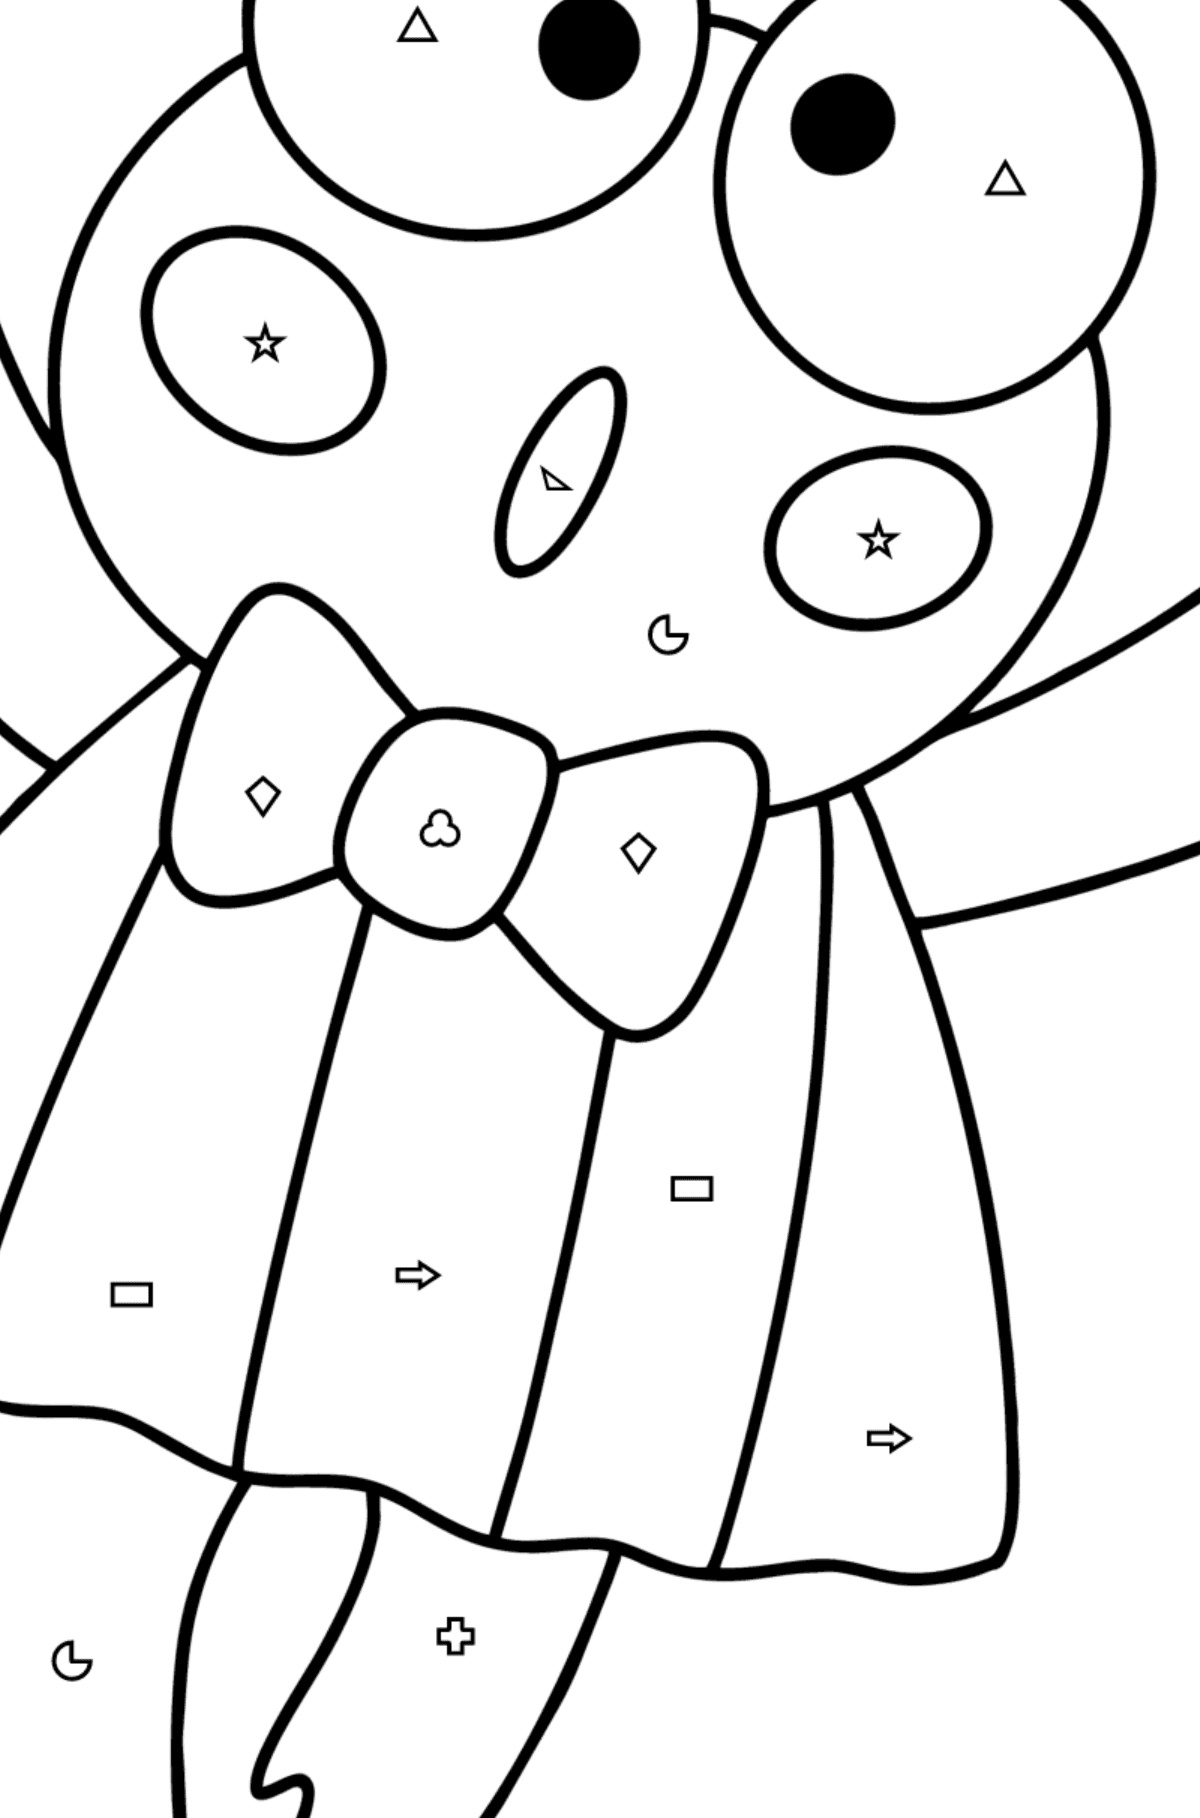 Hello Kitty Keroppi coloring page - Coloring by Geometric Shapes for Kids